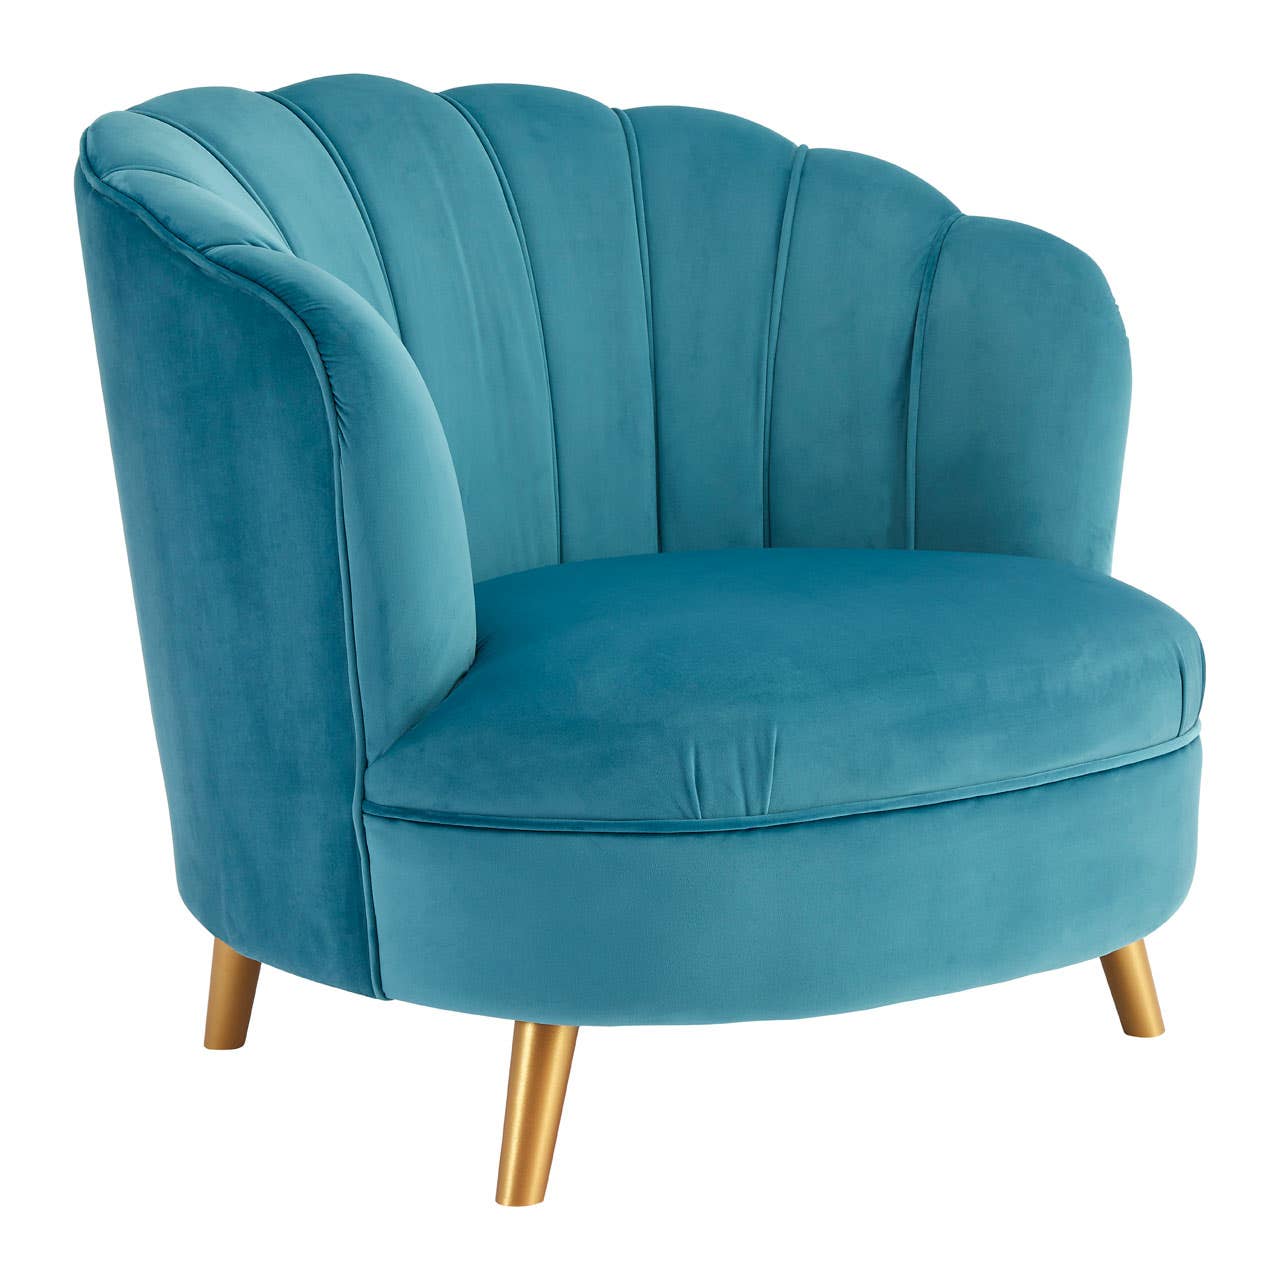 Orlina Blue Velvet Chair With Gold Wood Legs